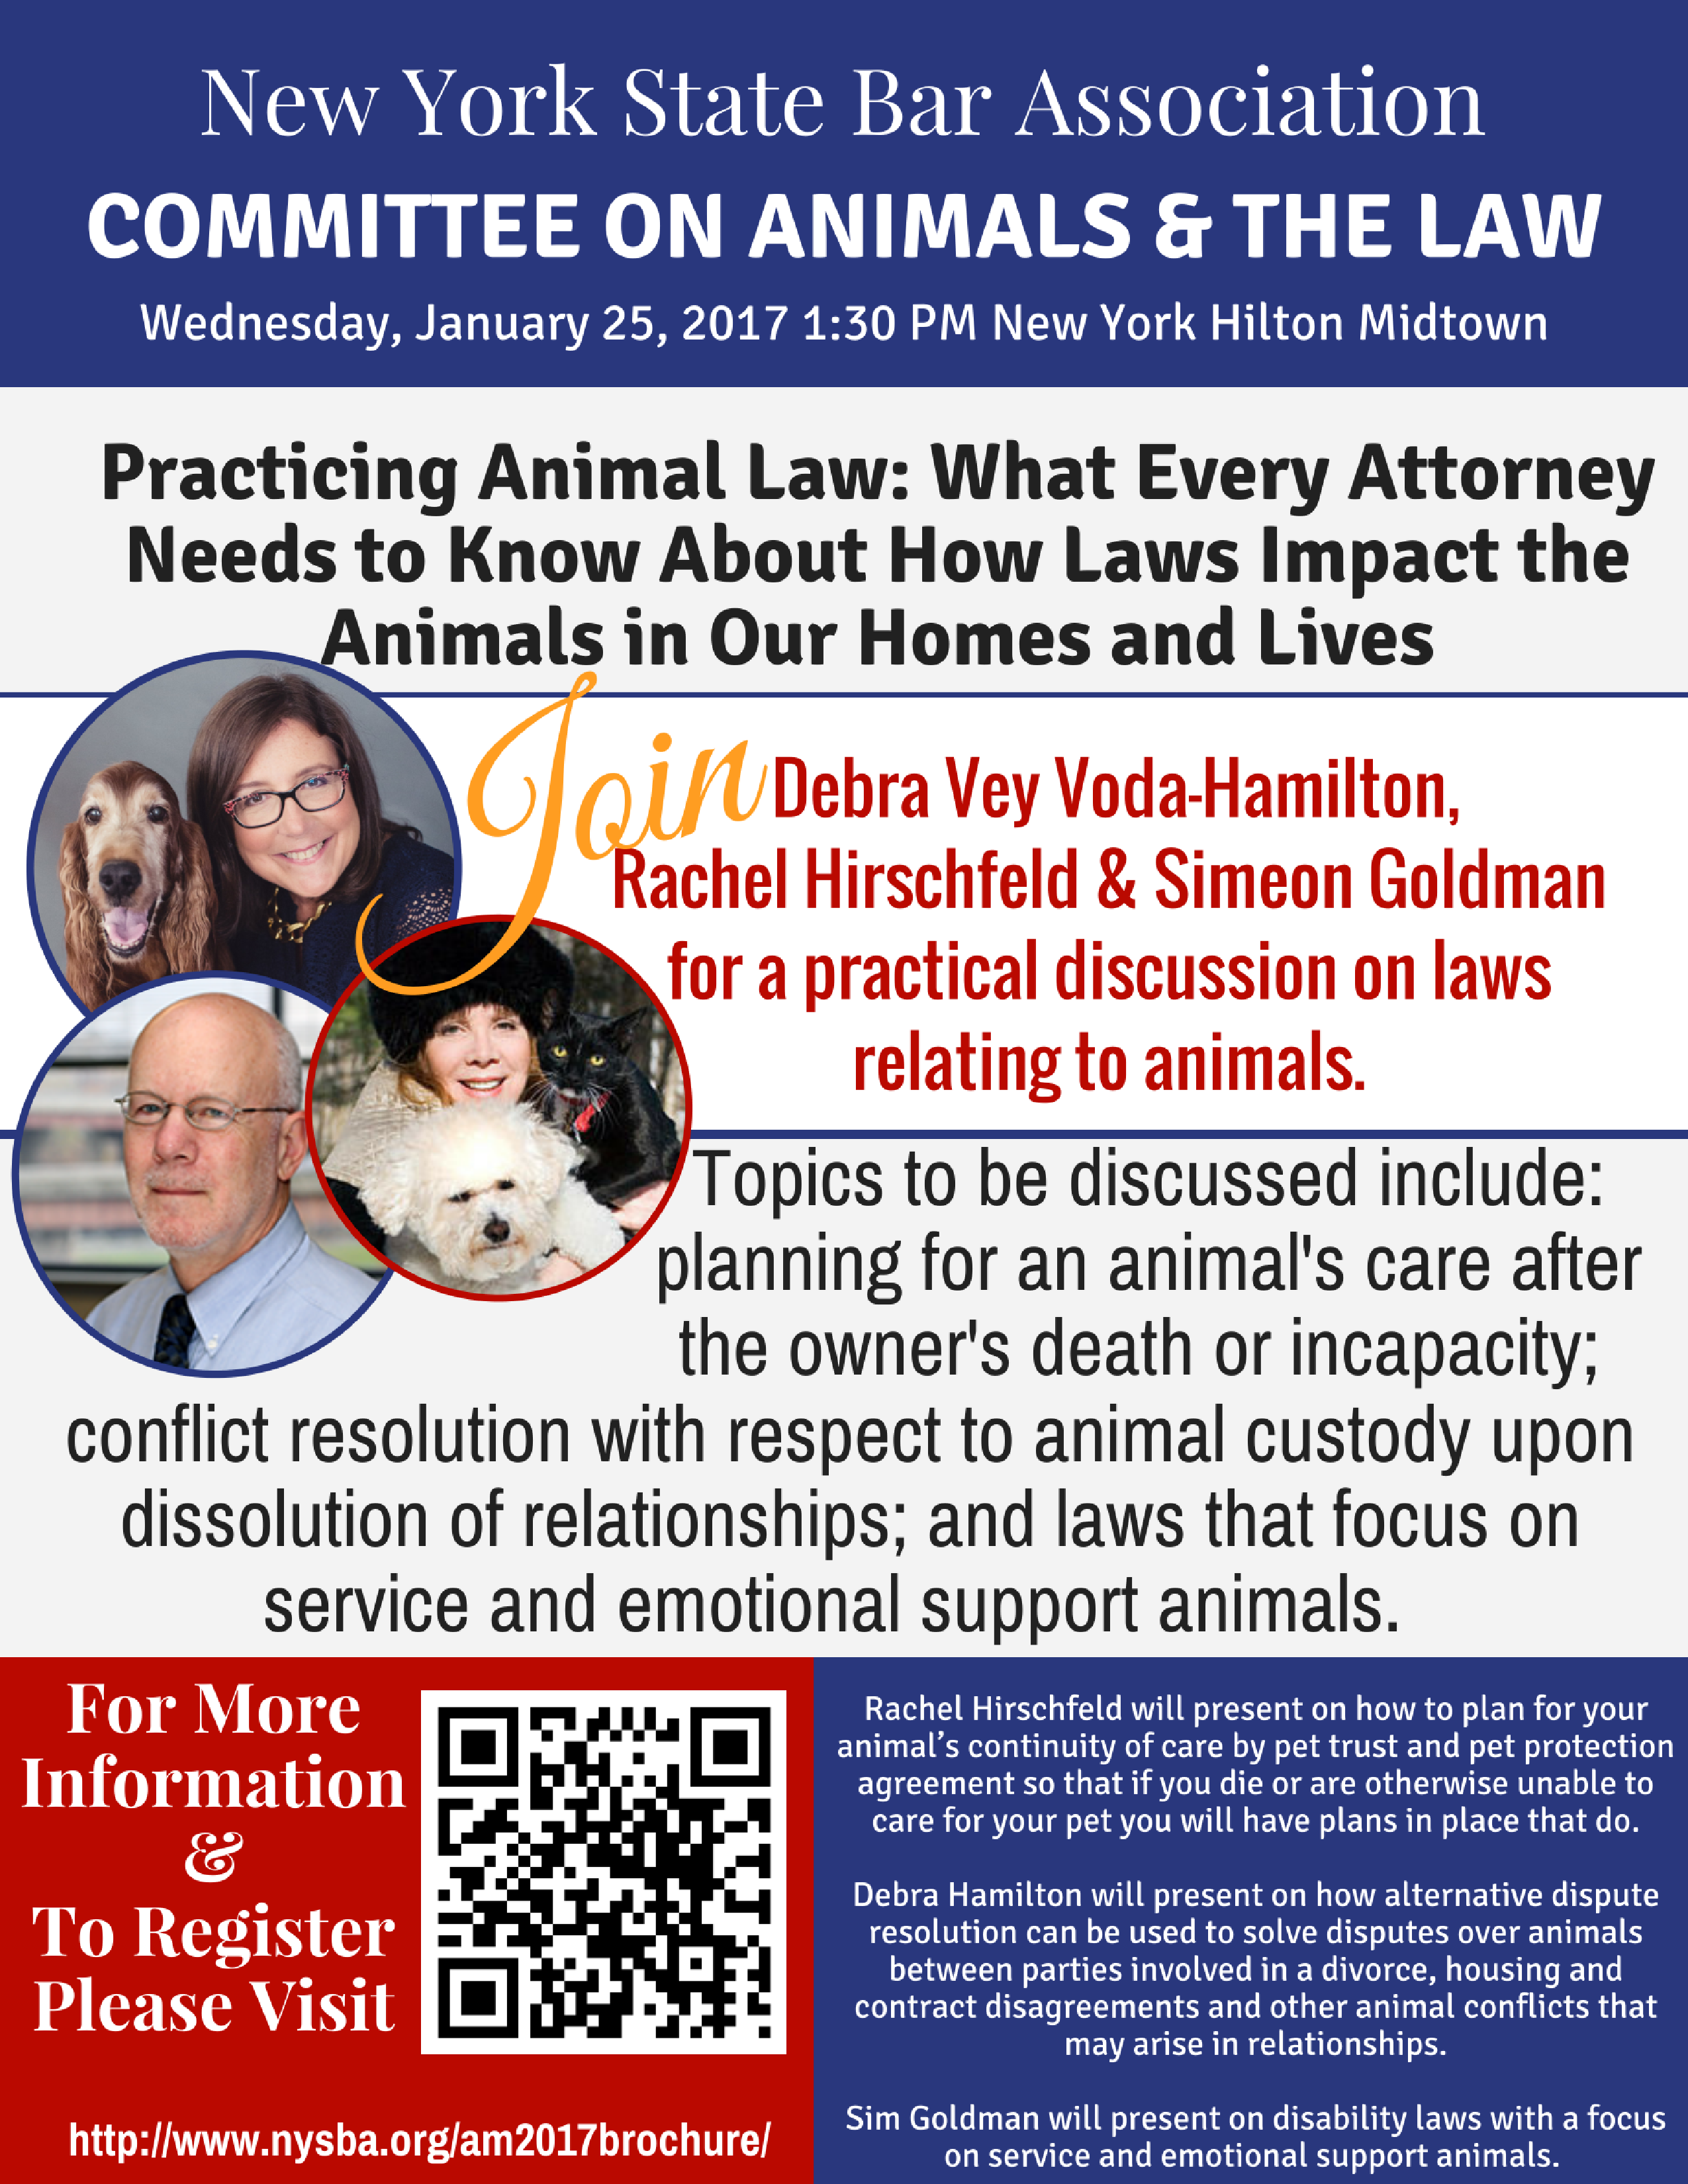 Practicing Animal Law: What Every Attorney Needs to Know About How Laws Impact the Animals in Our Homes and Lives, NYSBA, NYSBA 2017, Debra Vey Voda-Hamilton, Rachel Hirschfeld, Sim Goldman. Animal Law, Animal Custody, Animal Mediation, 